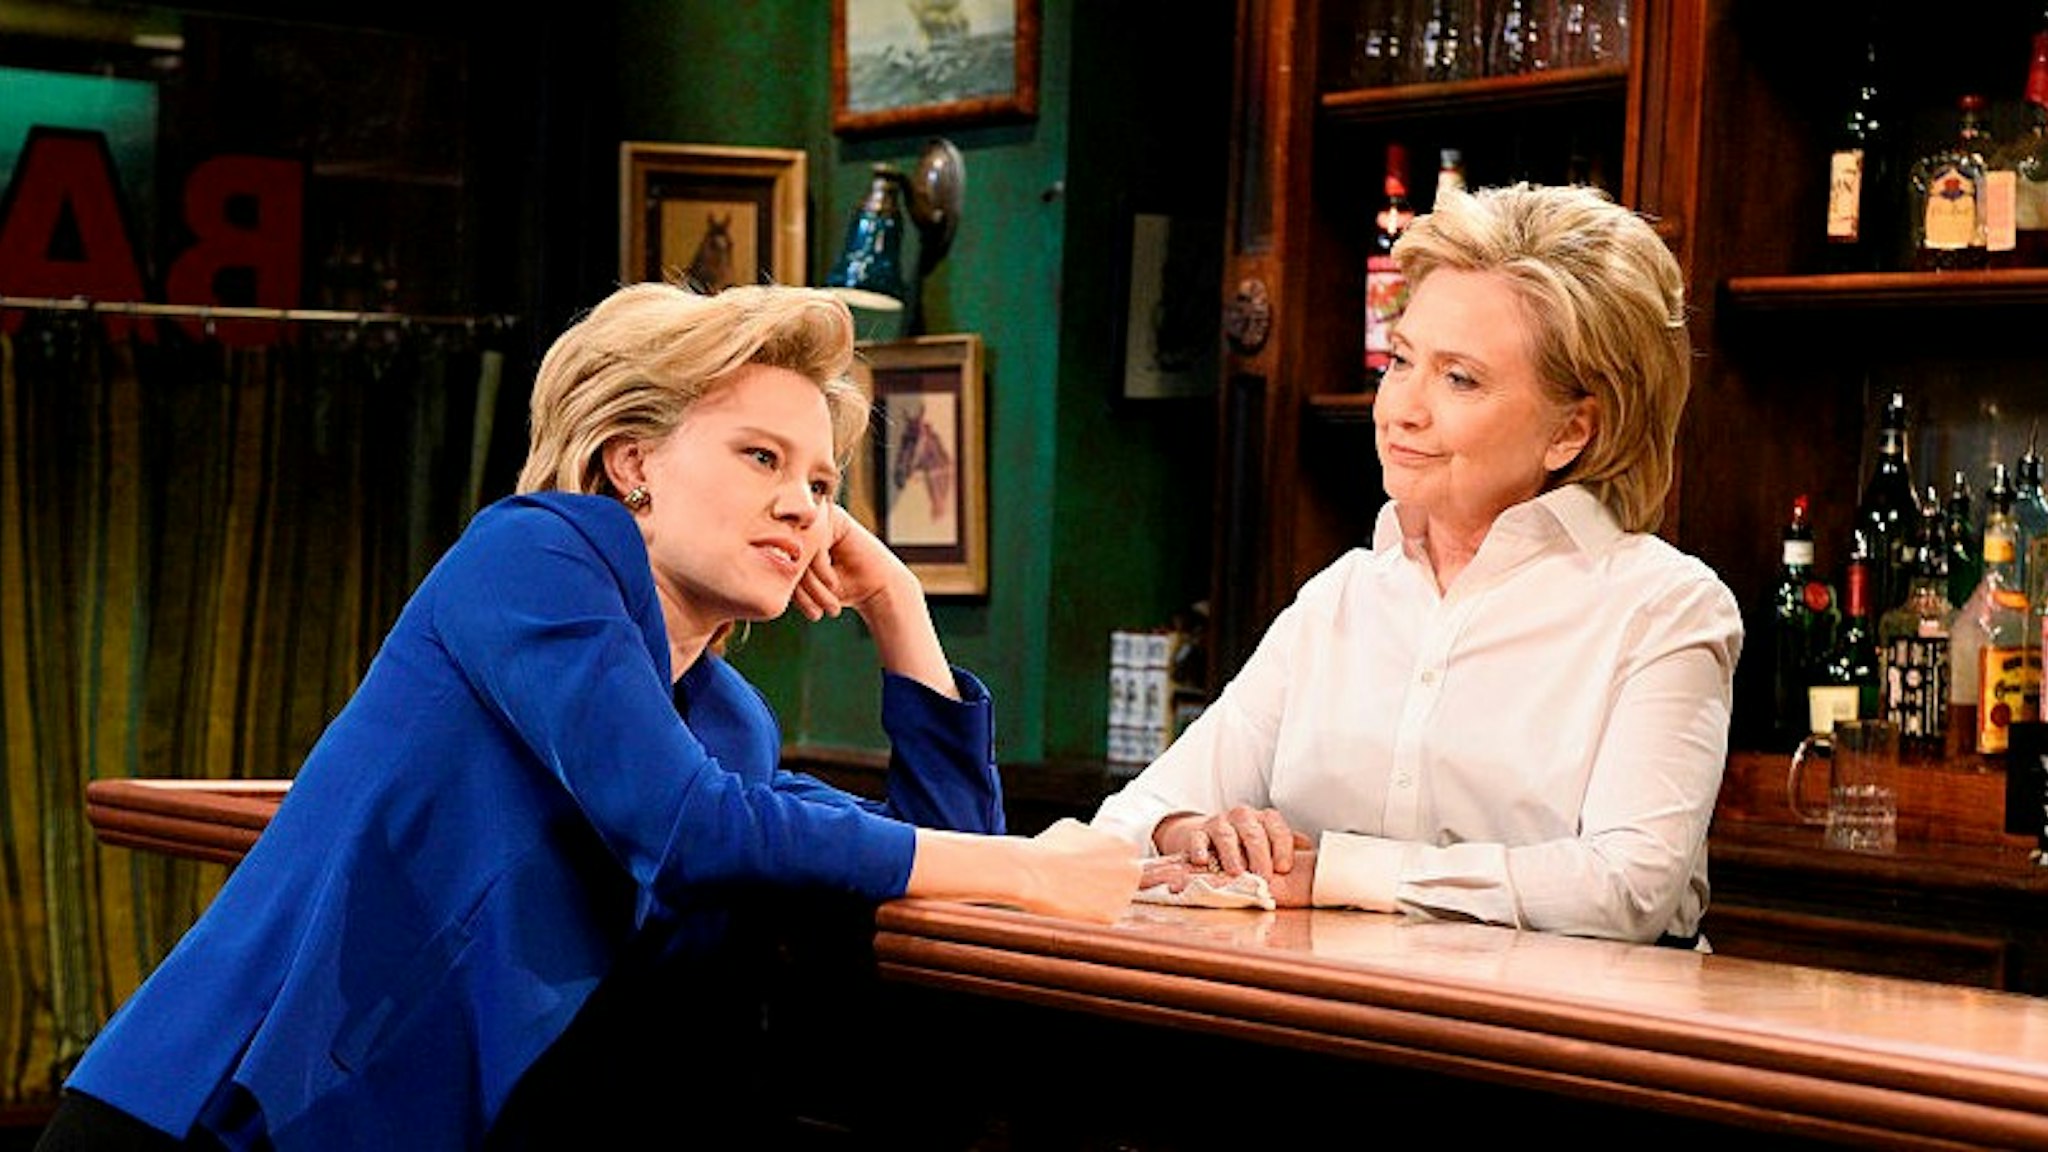 SATURDAY NIGHT LIVE -- "Miley Cyrus" Episode 1684 -- Pictured: (l-r) Kate McKinnon as Hillary Clinton and Hillary Clinton as Val during the "Bar Talk" sketch on October 3, 2015 -- (Photo by: